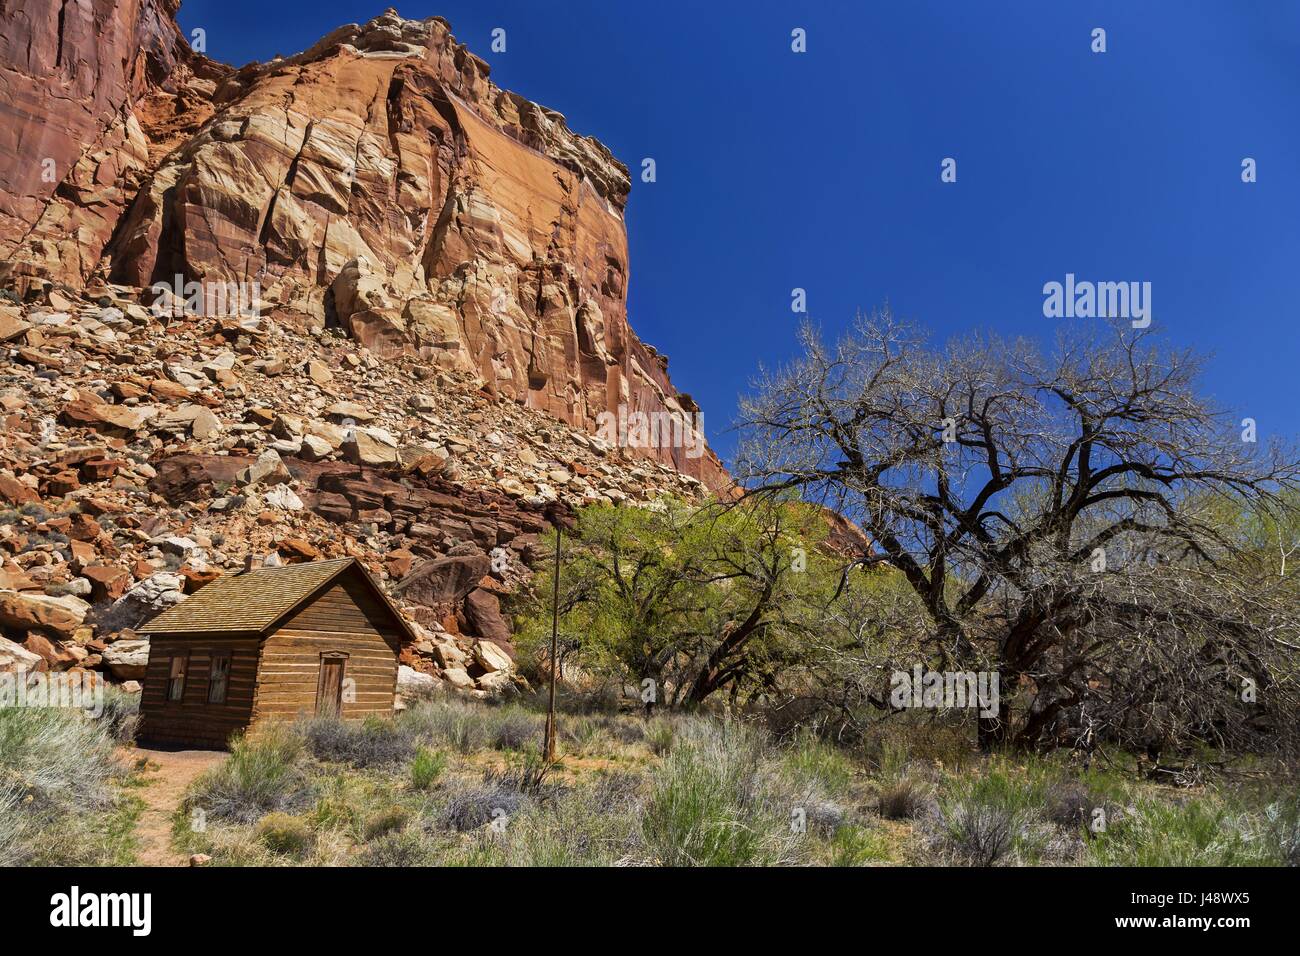 Vintage Historic Mormon Settlers Rustic Wooden Log Cabin School. Fruita, Capitol Reef National Park, with Scenic Utah Red Rock Landscape on Sunny Day Stock Photo